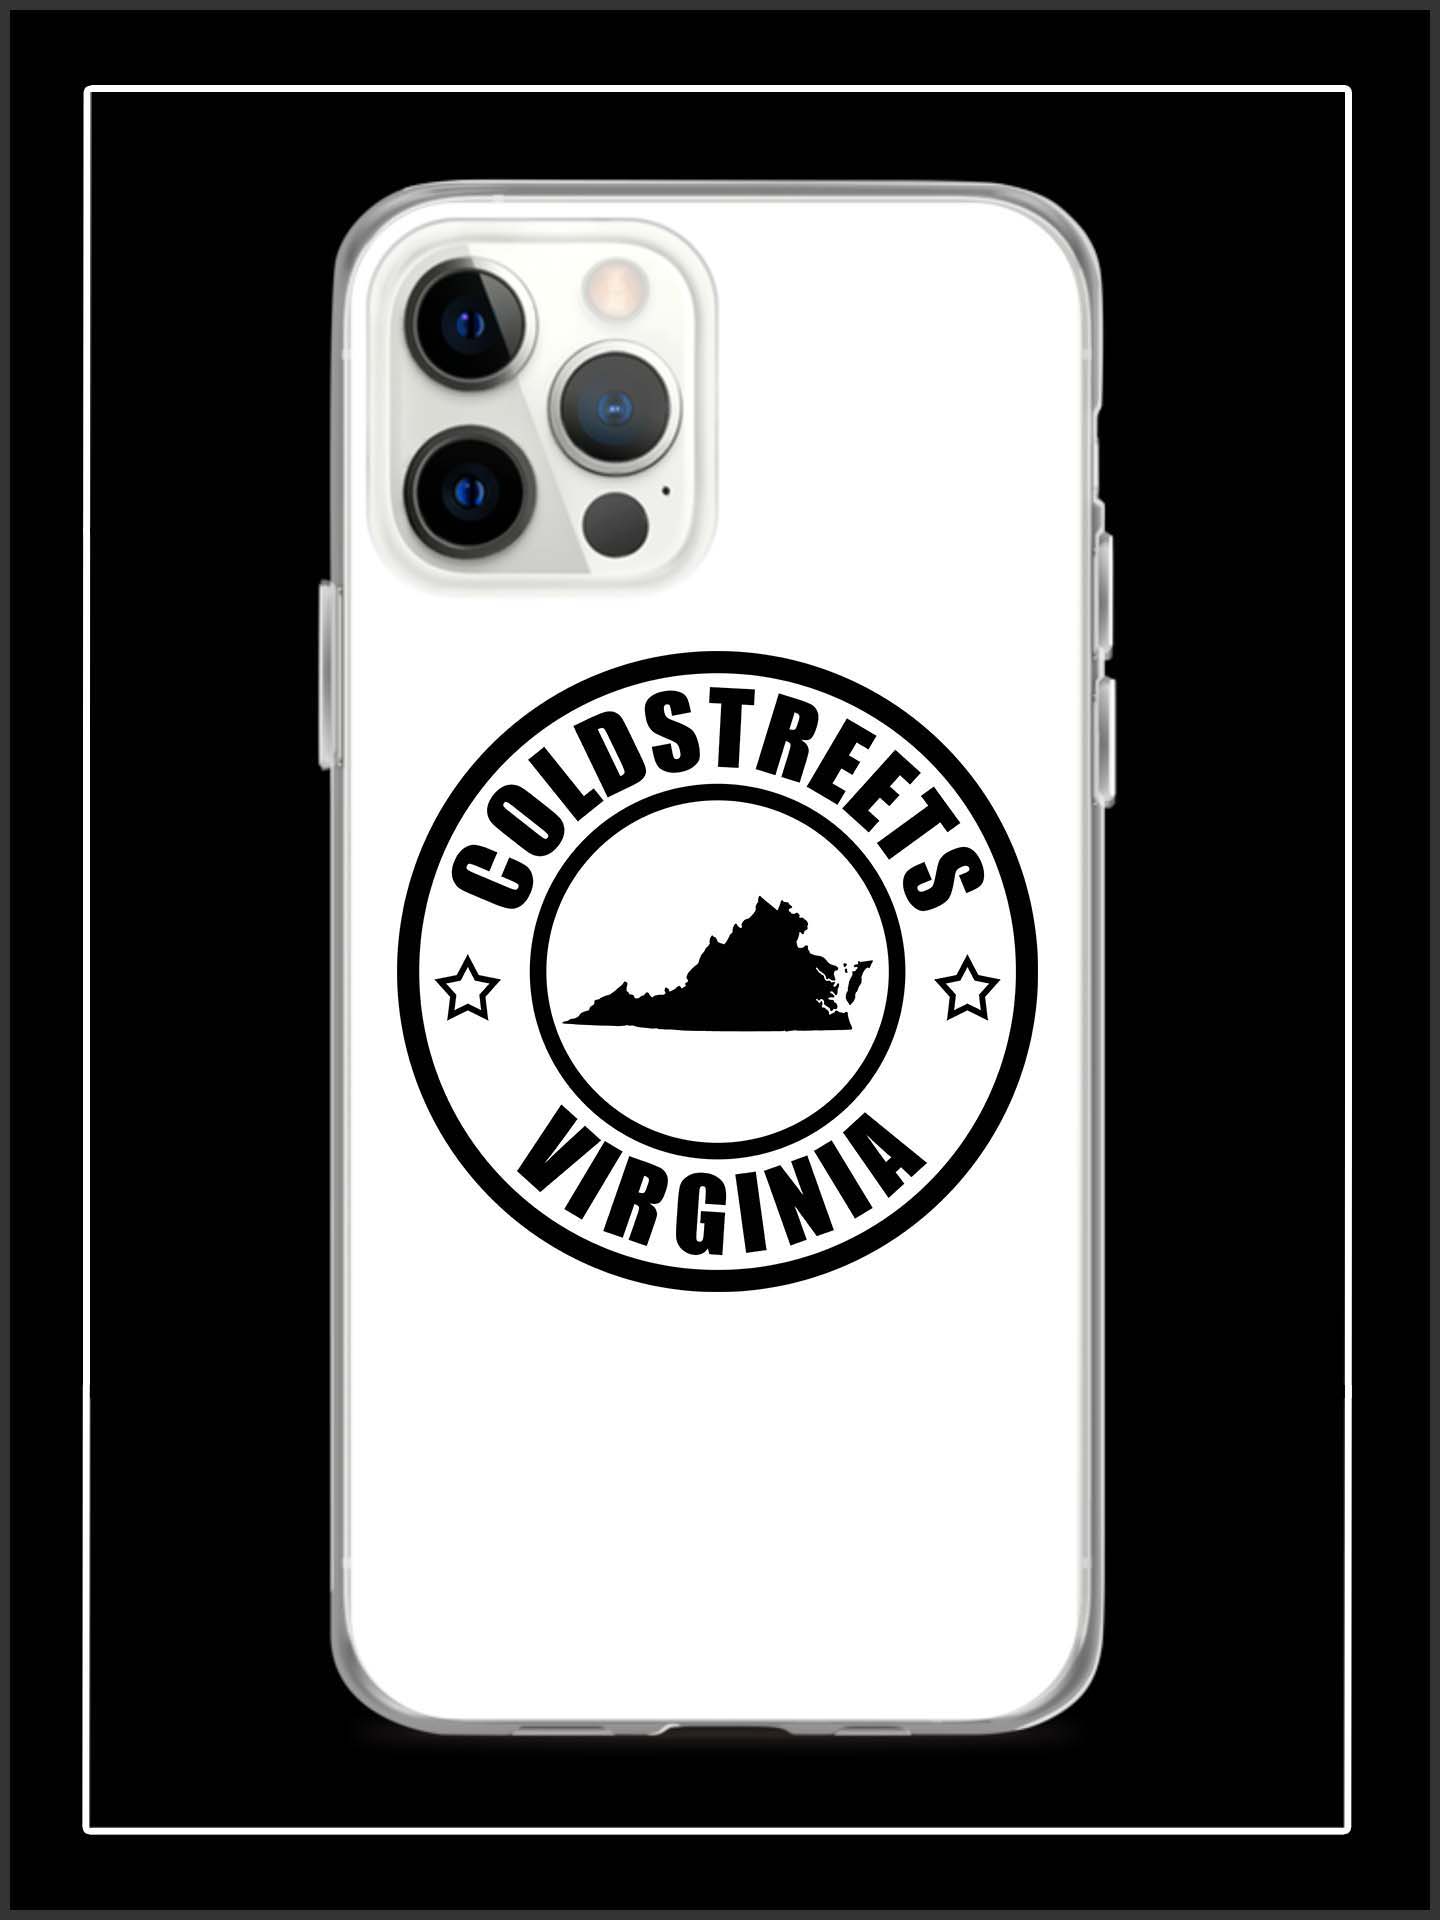 Cold Streets Virginia iPhone Cases